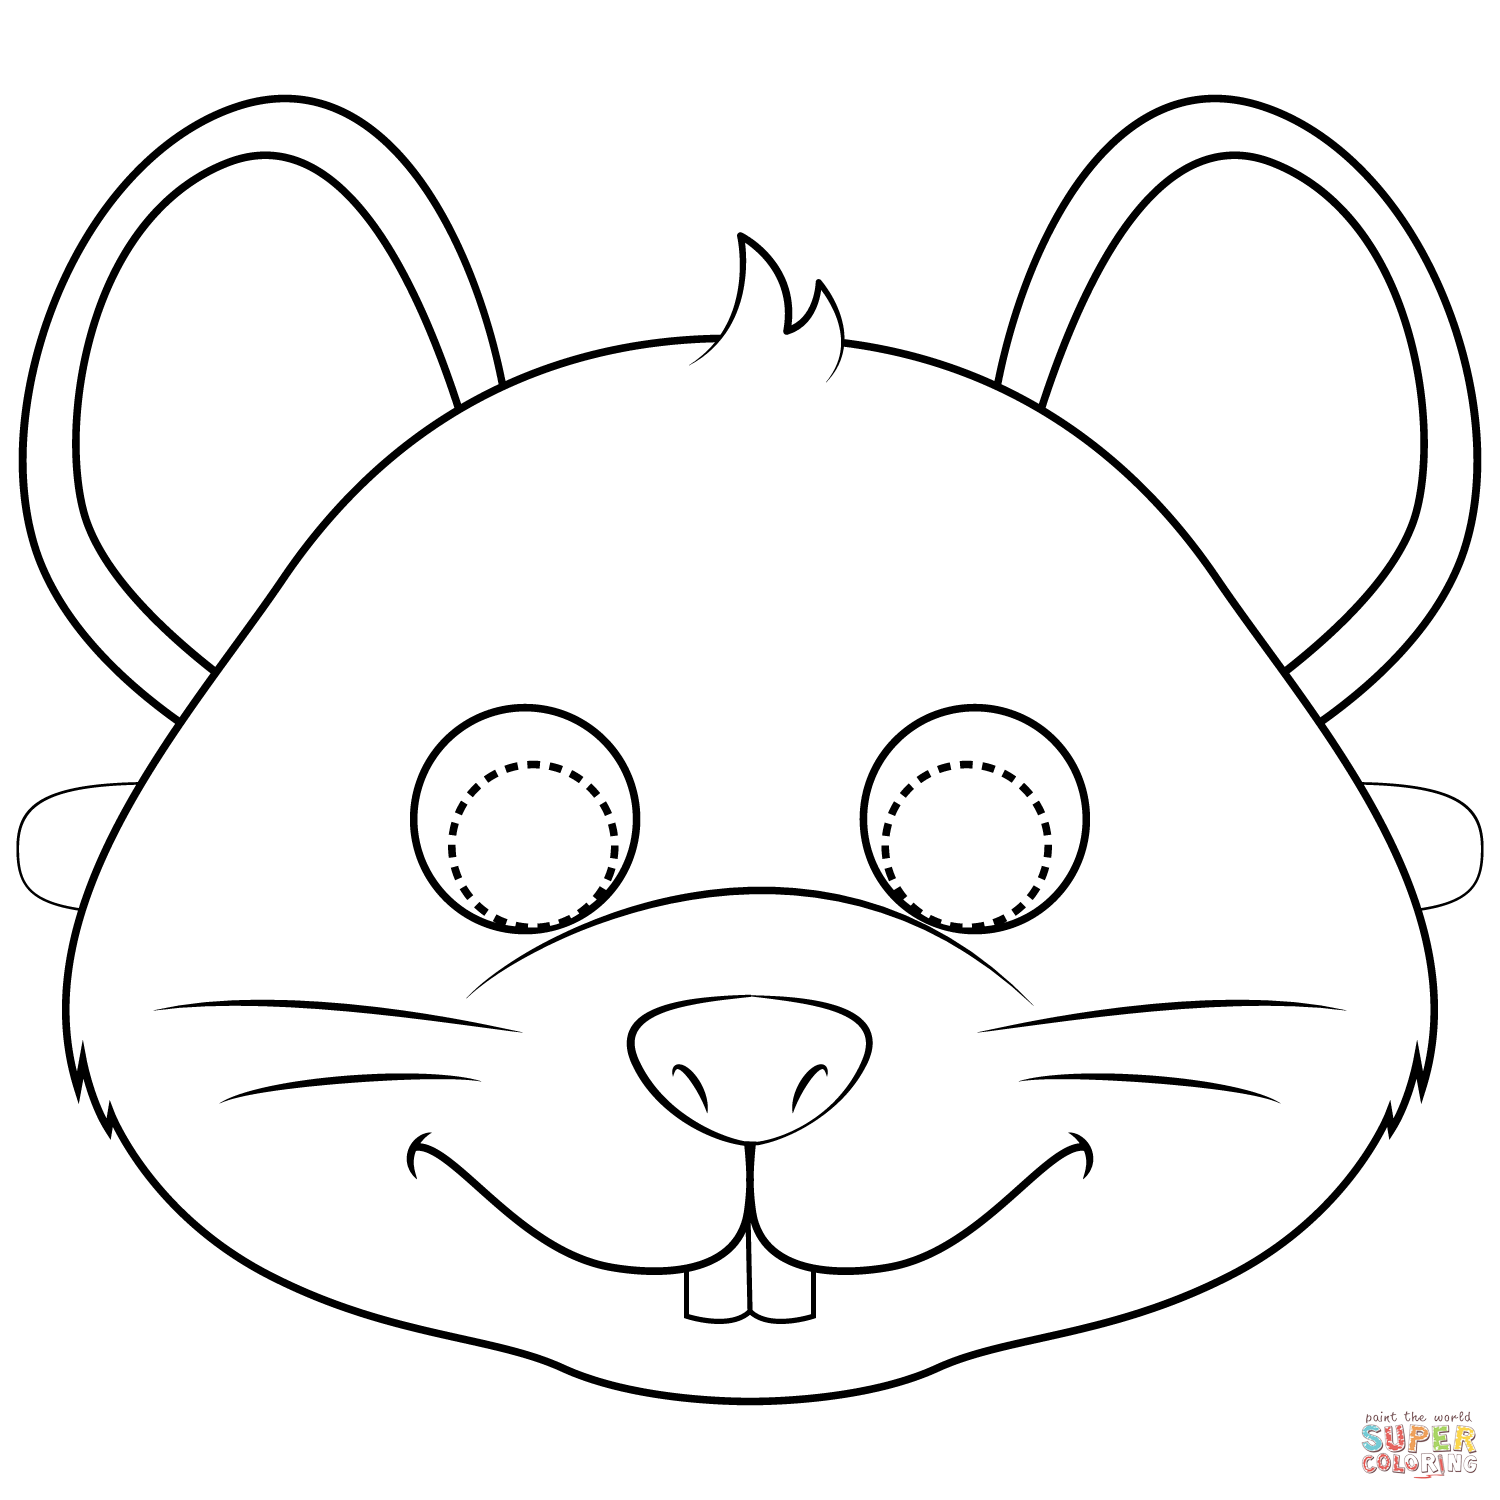 Animal Masks Coloring Pages - Coloring Home